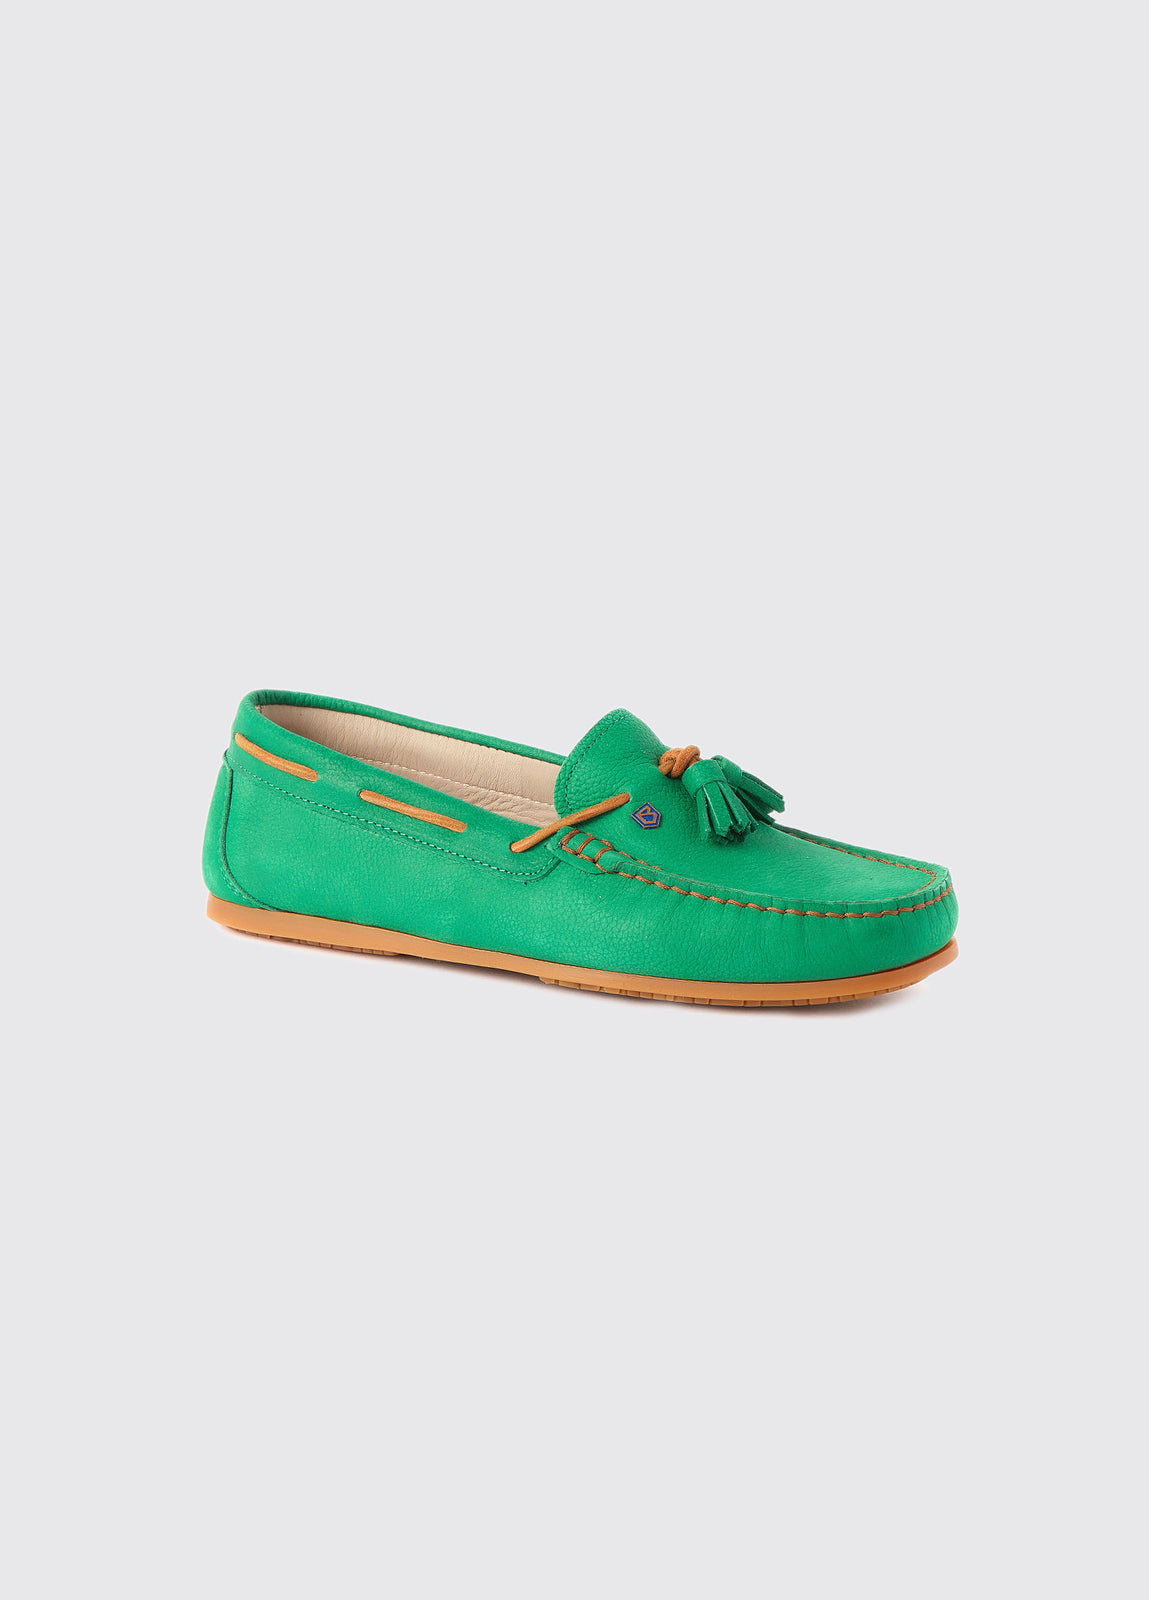 Dubarry Womens Jamaica Loafer - Kelly Green